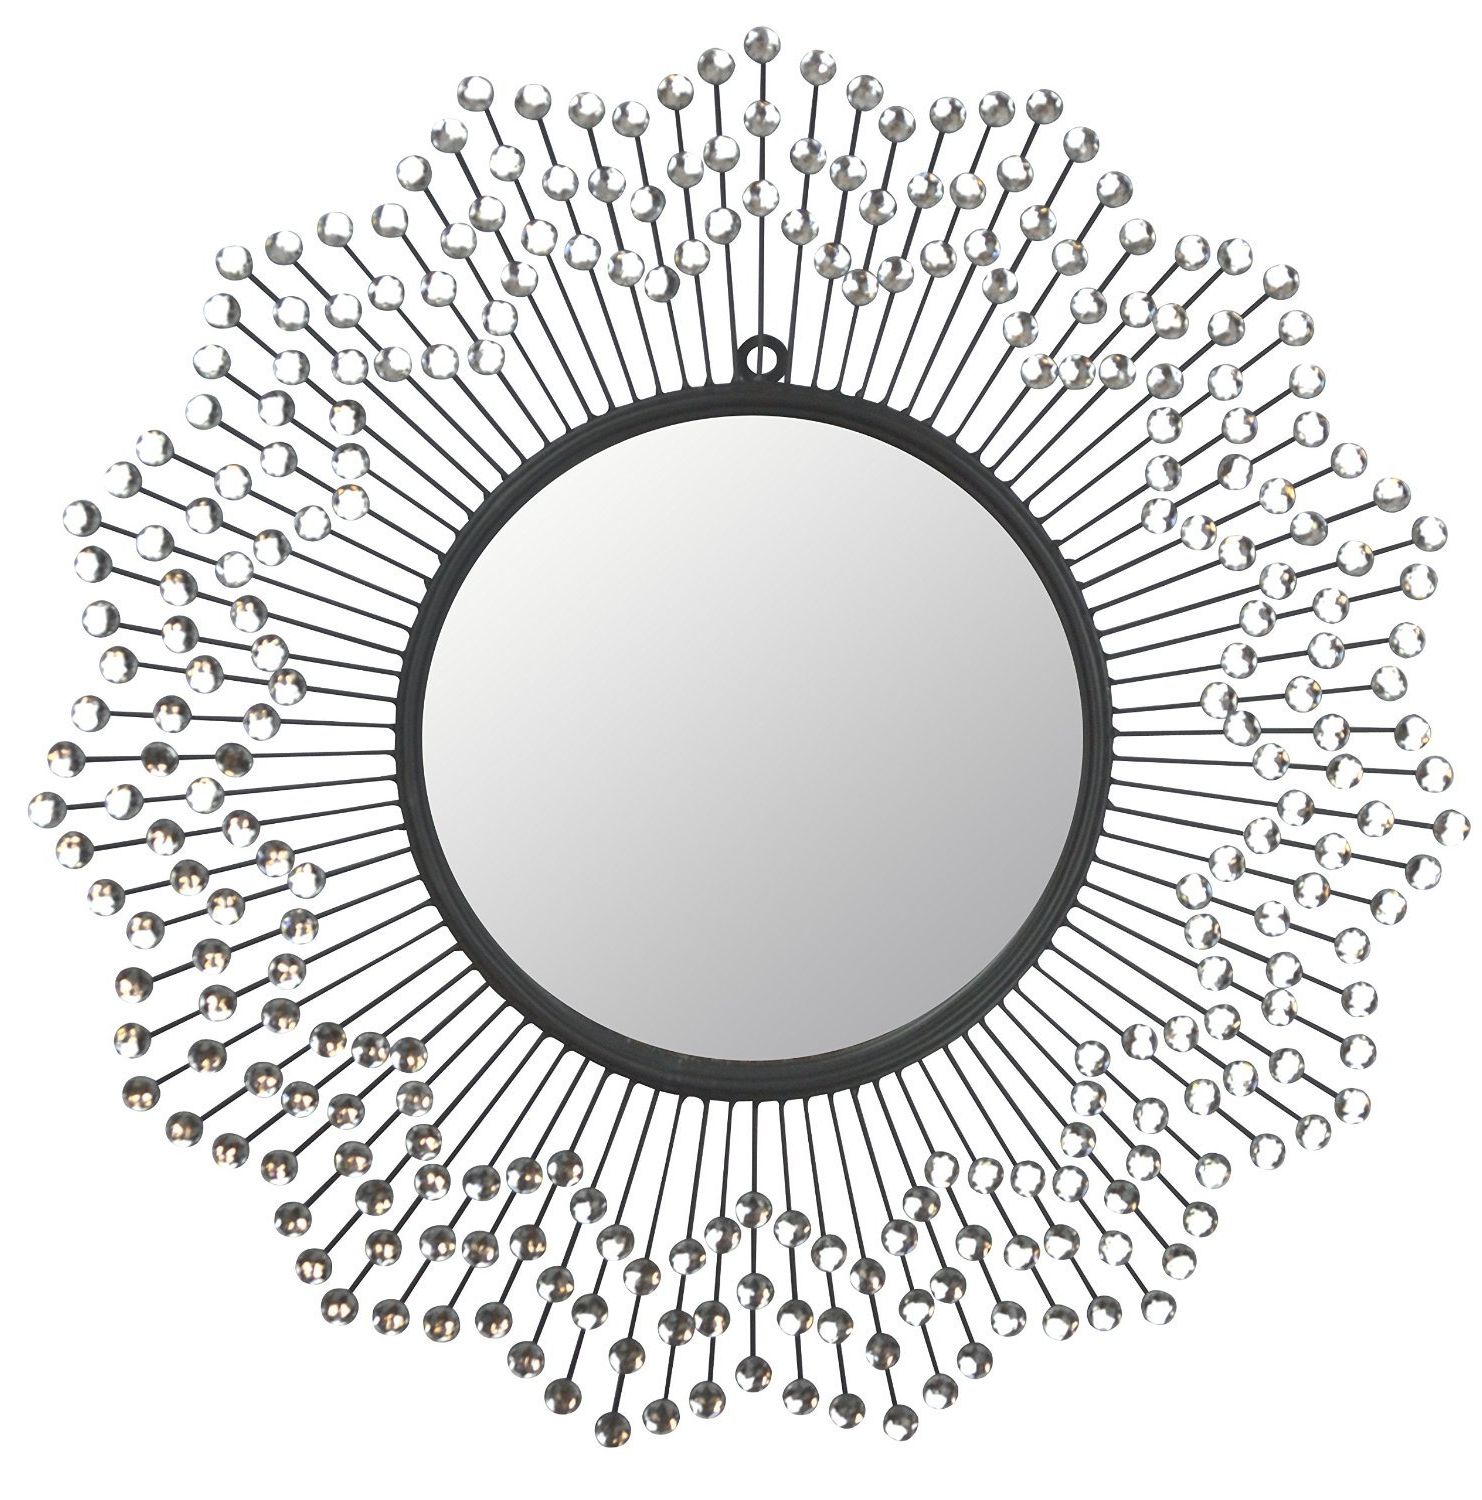 Decorative Round Wall Mirrors Throughout Newest Lulu Décor, Celebration Metal Wall Mirror, Frame 24”, Round Decorative  Mirror For Living Room And Office Space (View 8 of 20)